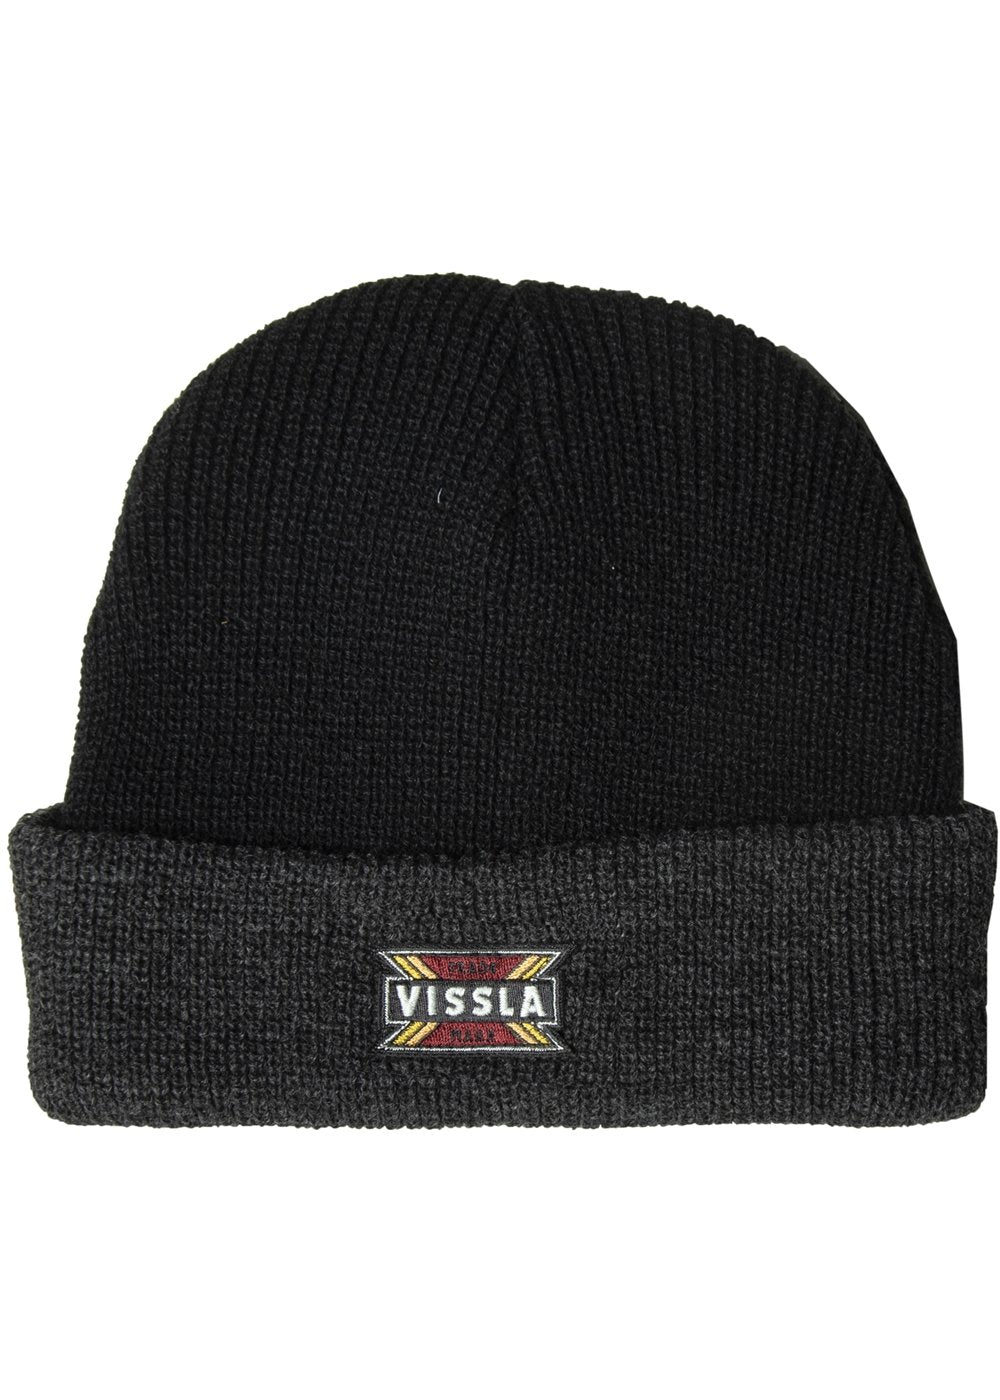 Vissla BlackSolid Sets beanie with a rectangular Vissla patch on the front roll